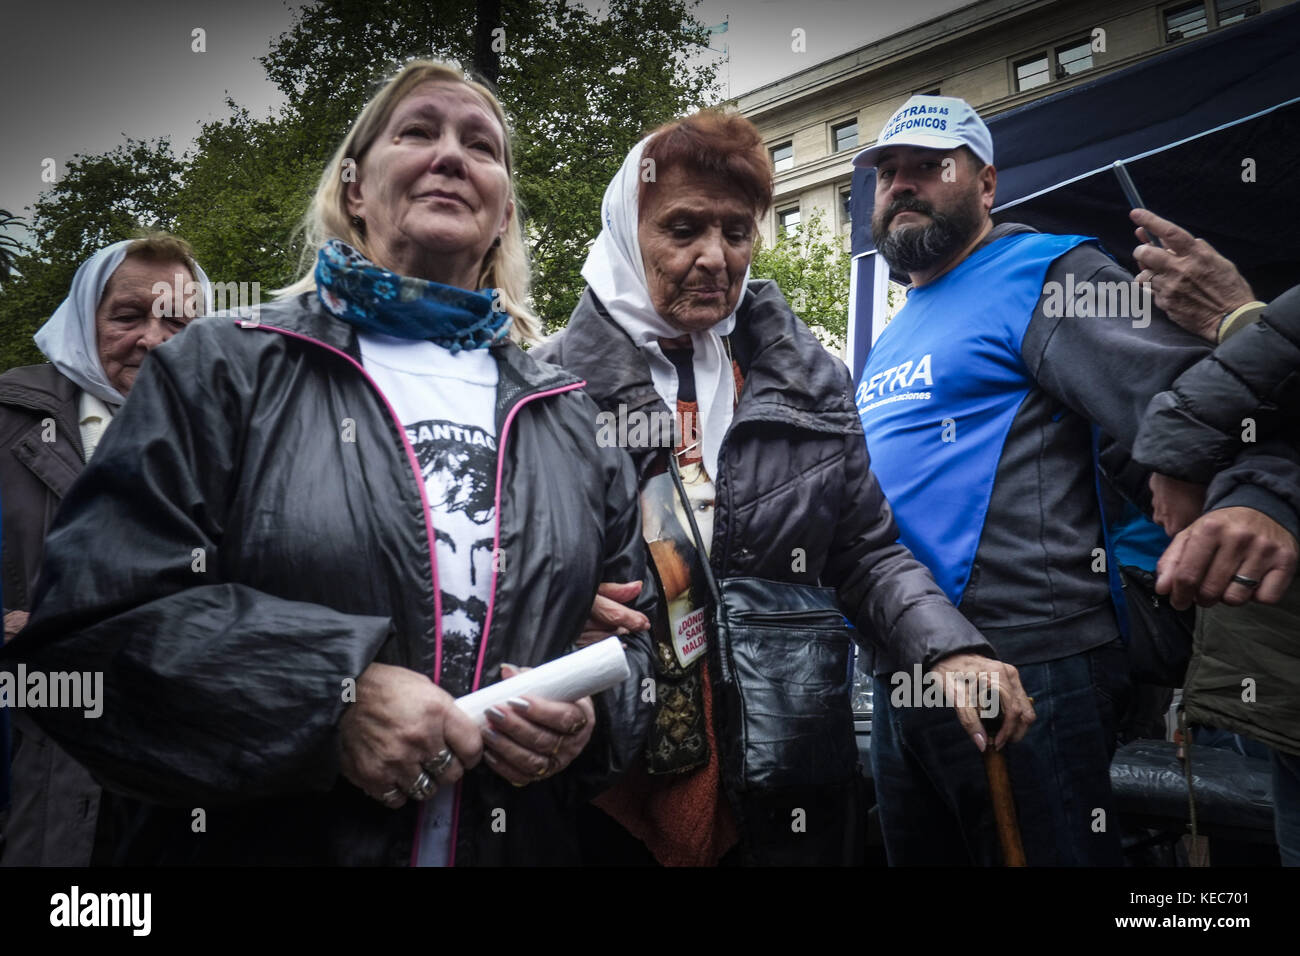 Federal Capital, Buenos Aires, Argentina. 16th Sep, 2017. The family of Santiago Maldonado is seen during a protest against the disappearance of Santiago Maldonado since 1 August 2017.Despite the rain, thousands of protesters gathered on Sunday in Plaza de Mayo hosted by the relatives and friends of Santiago Maldonado two months after his disappearance, after he was reportedly surrendering to Argentinian police guards during a raid on a camp of Mapuche protesters in Patagonia, south of Argentina. Various protests were seen in several other cities in Argentina, and abroad such as London, Stock Photo